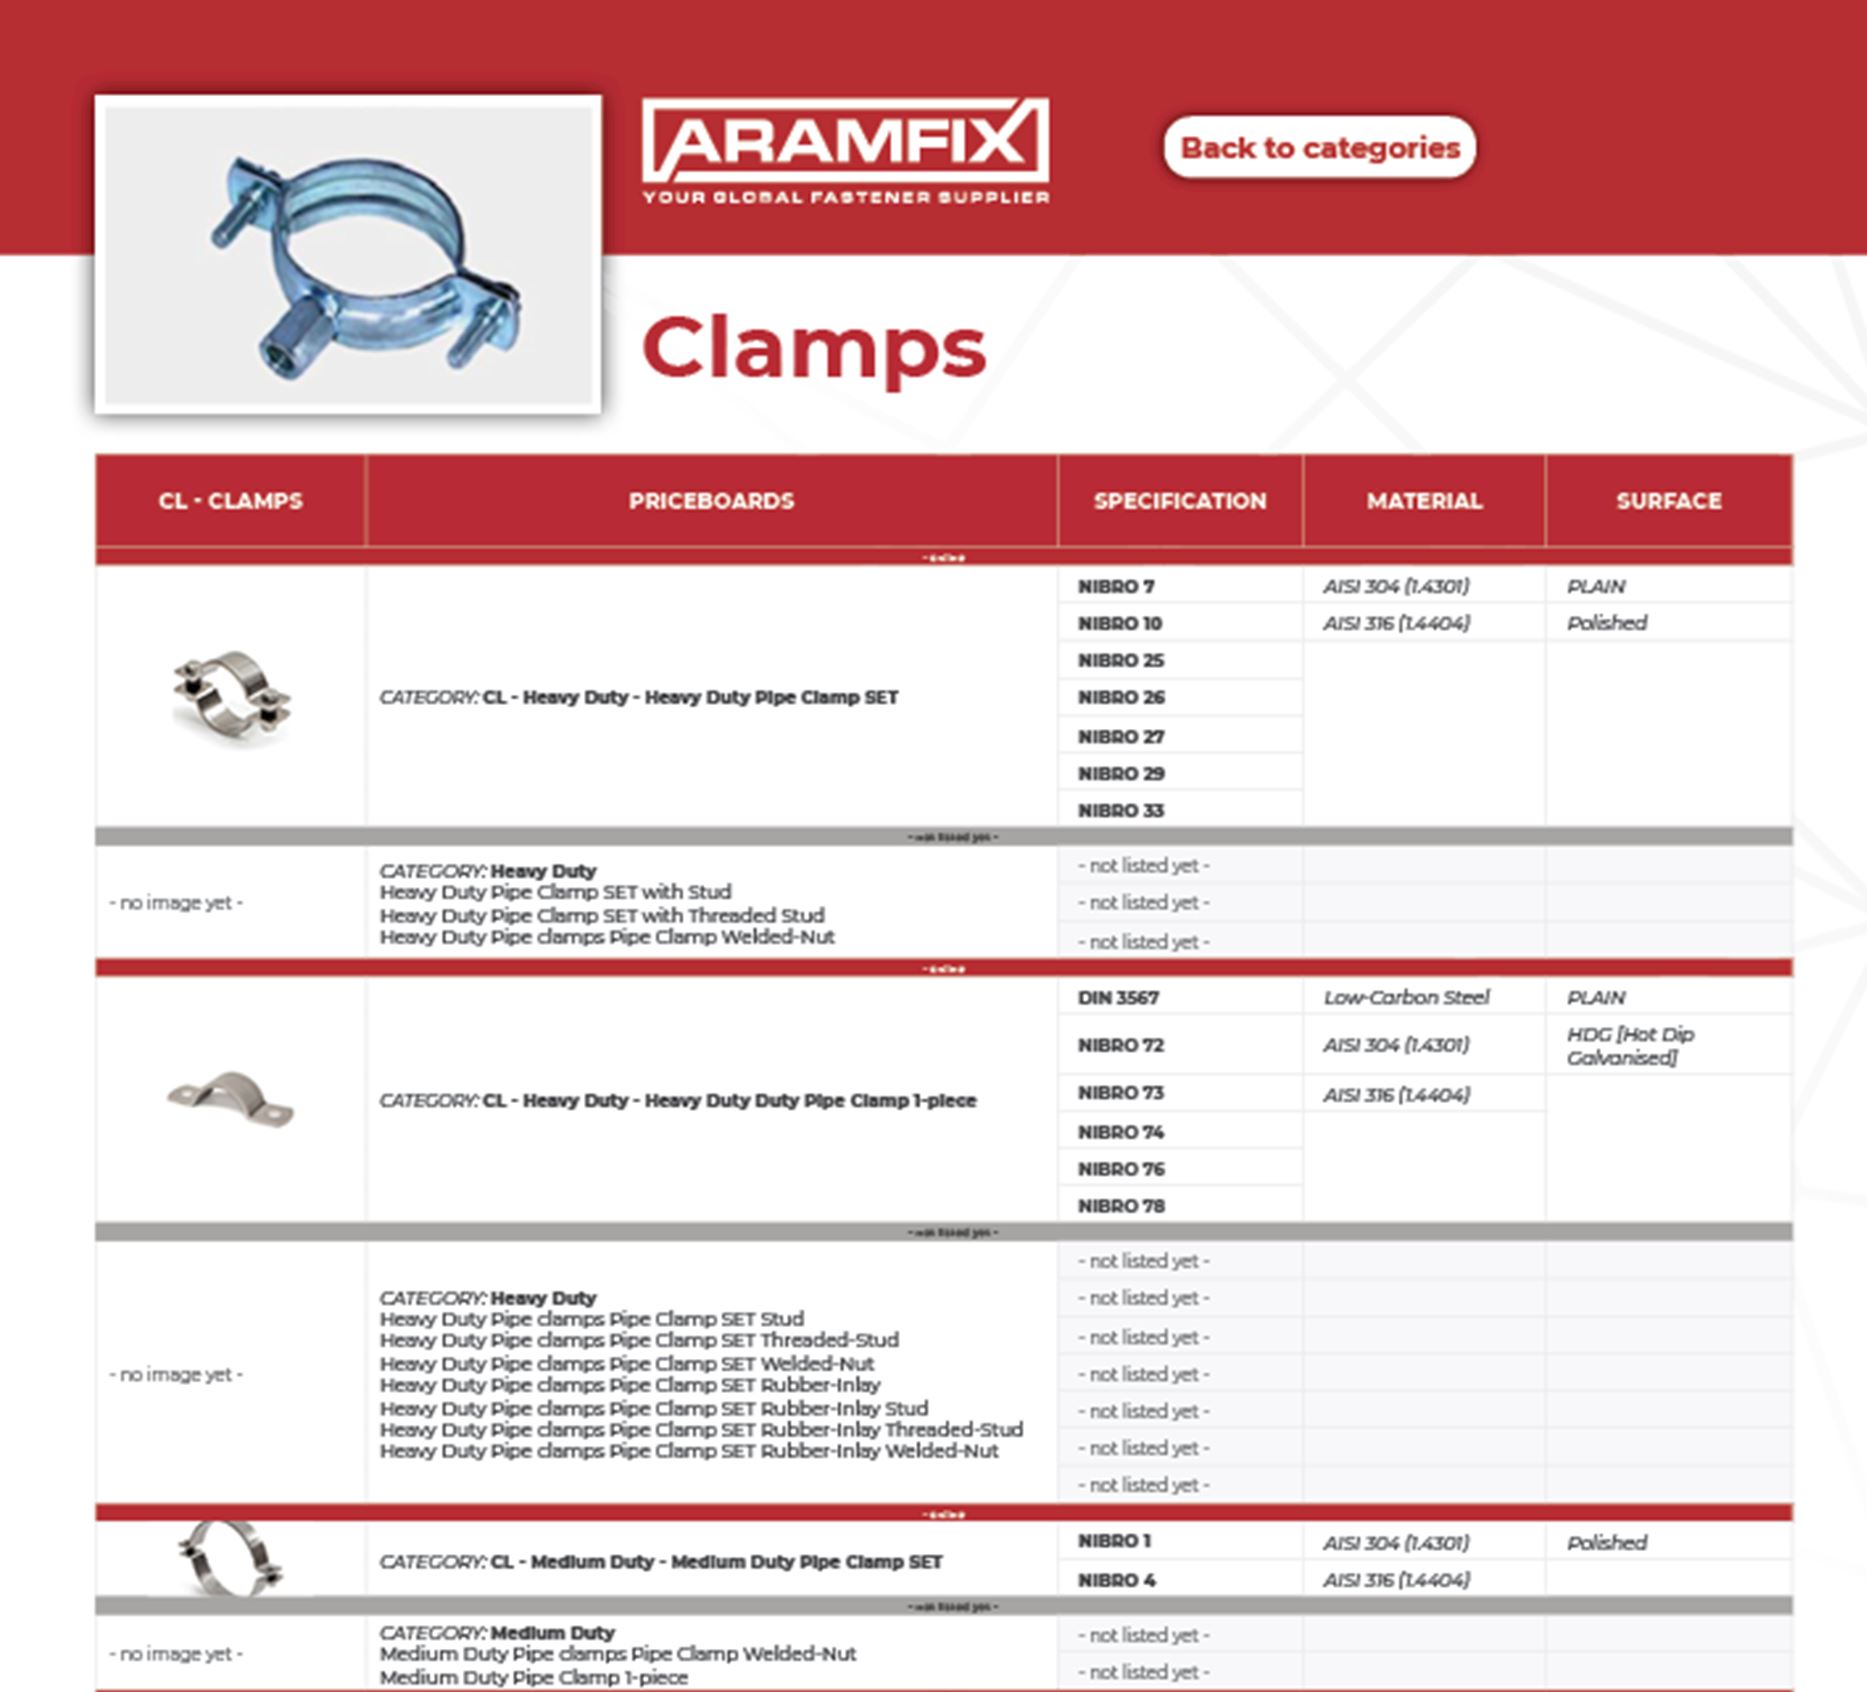 clamps